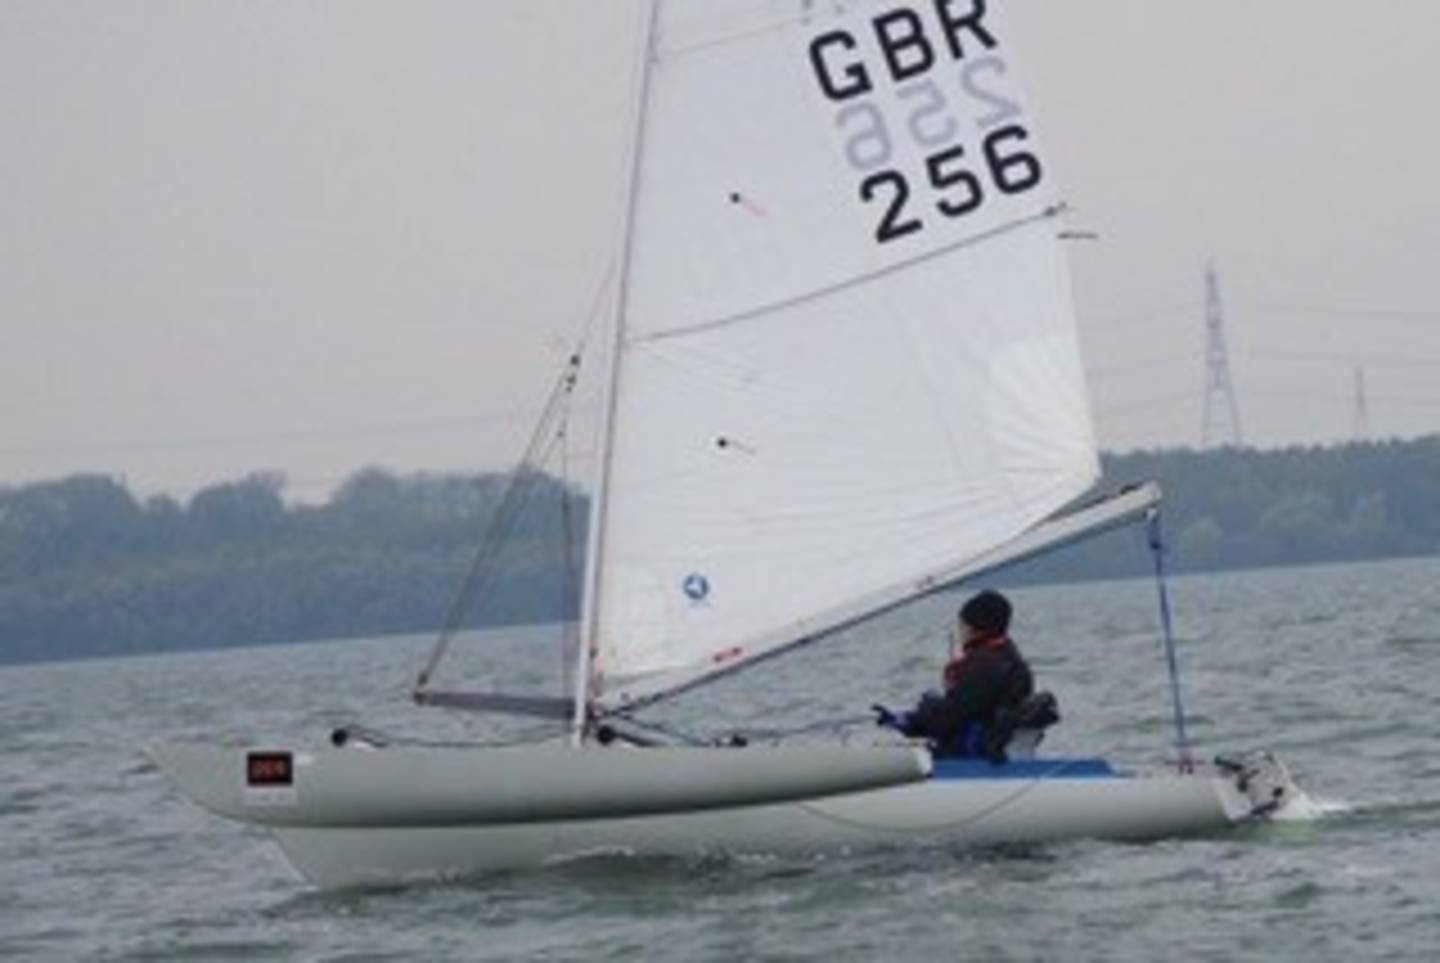 Julia out on the water sailing